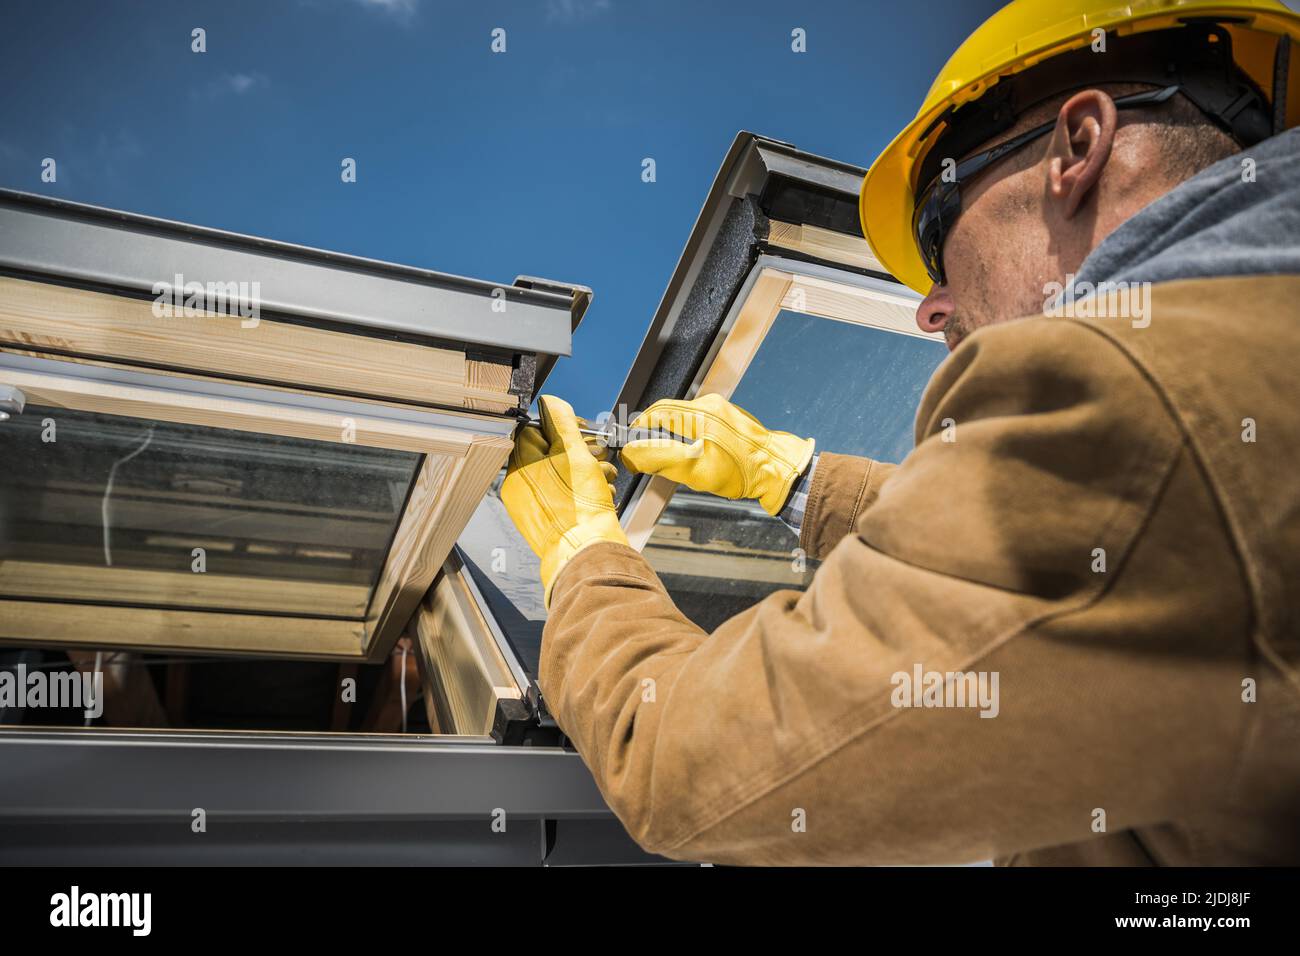 Caucasian Worker Wearing Safety Helmet and Protective Gloves Carrying Out Repair Works on Roof Skylight Windows Using His Screwdriver. Stock Photo